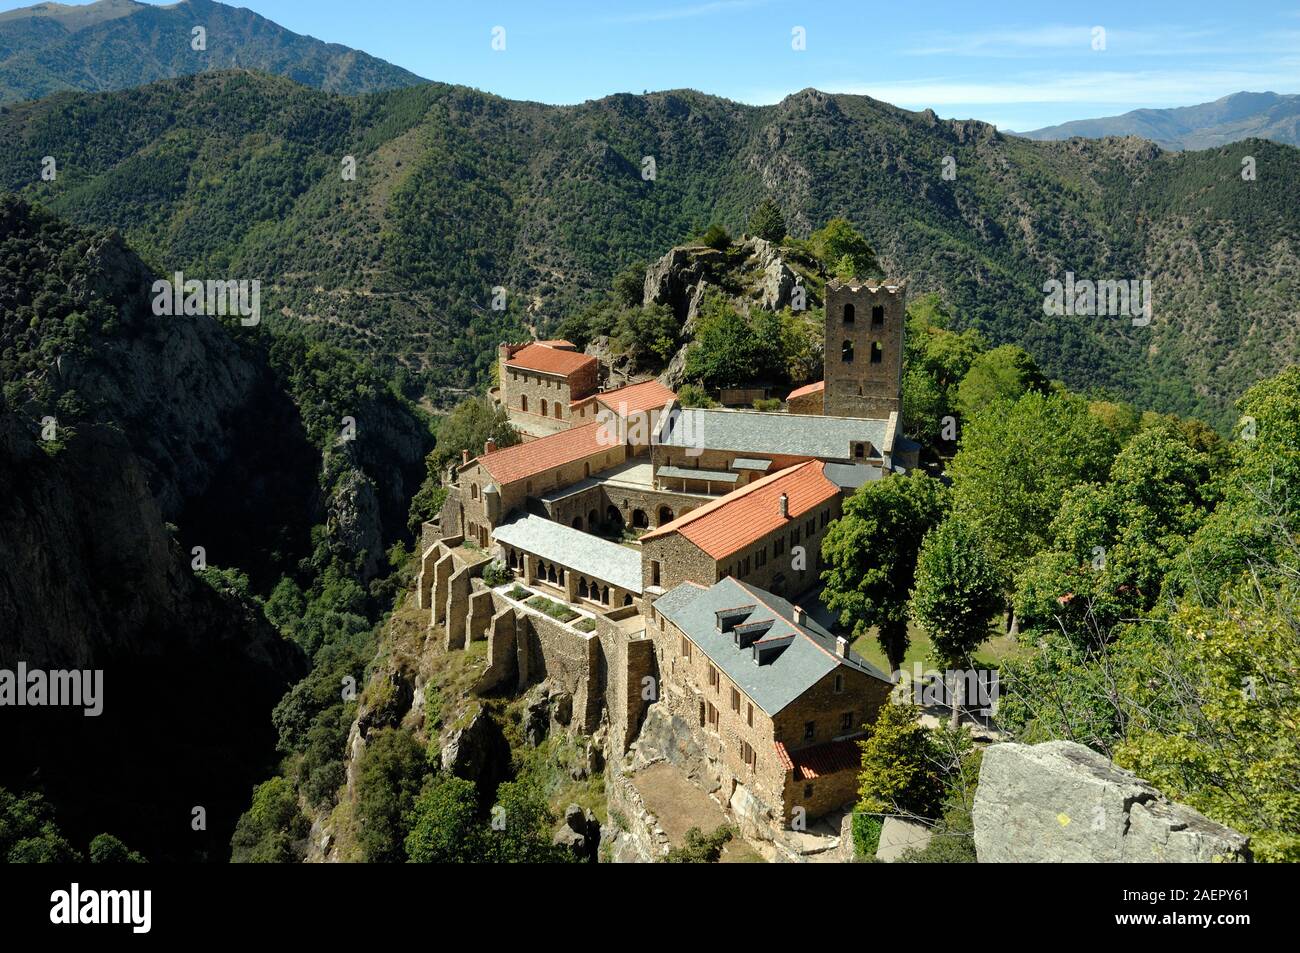 Aerial View or High-Angle View of Abbaye Saint-Martin du Canigou Abbey or Benedictine Monastery, f. c10th by Guifred II, Pyrénées-Orientales France Stock Photo